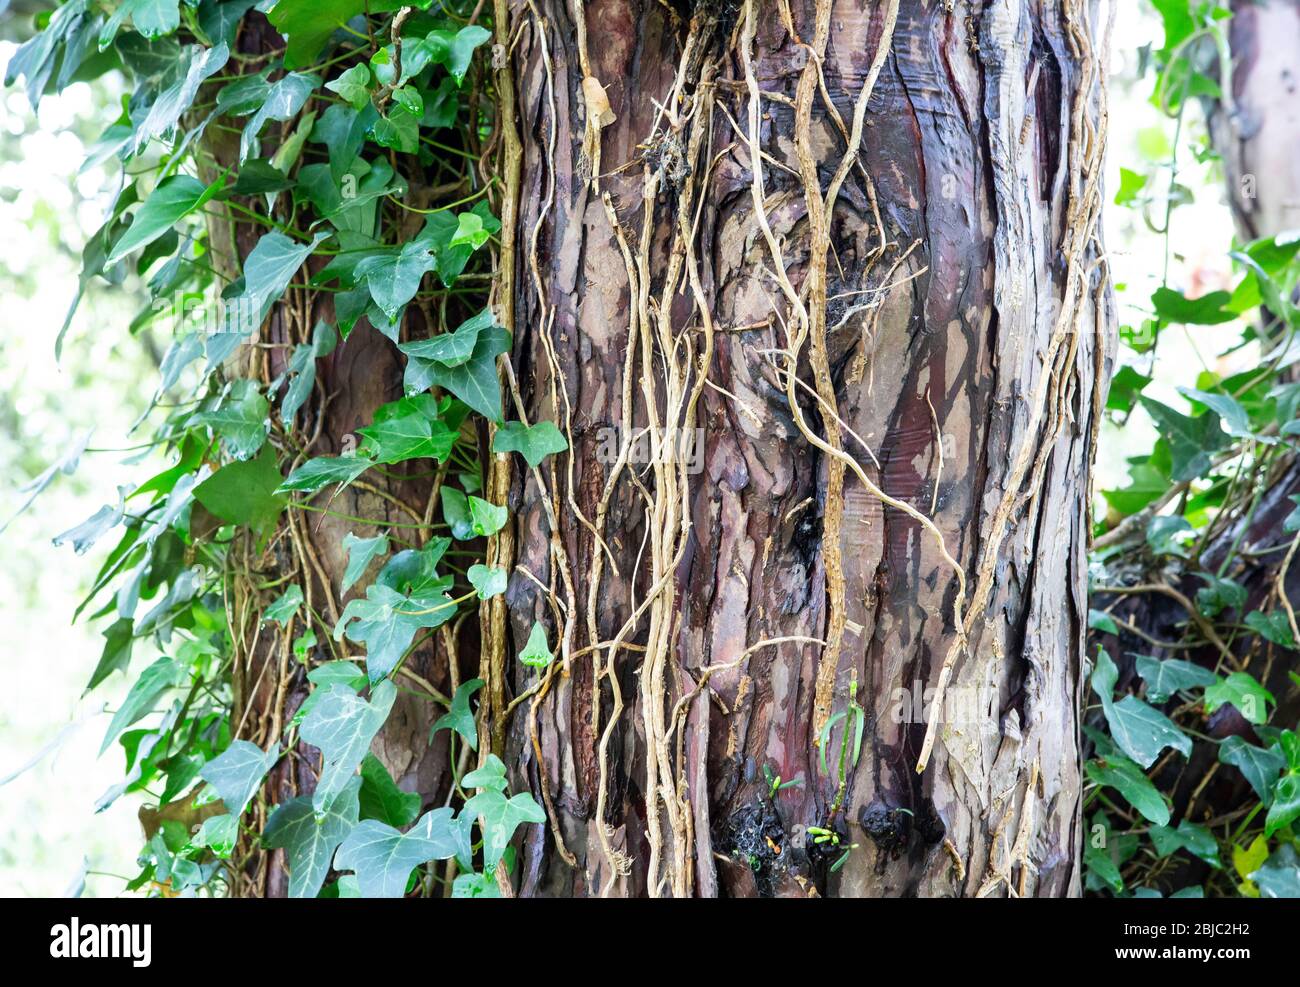 Ivy climbing up a tree trunk detail Stock Photo